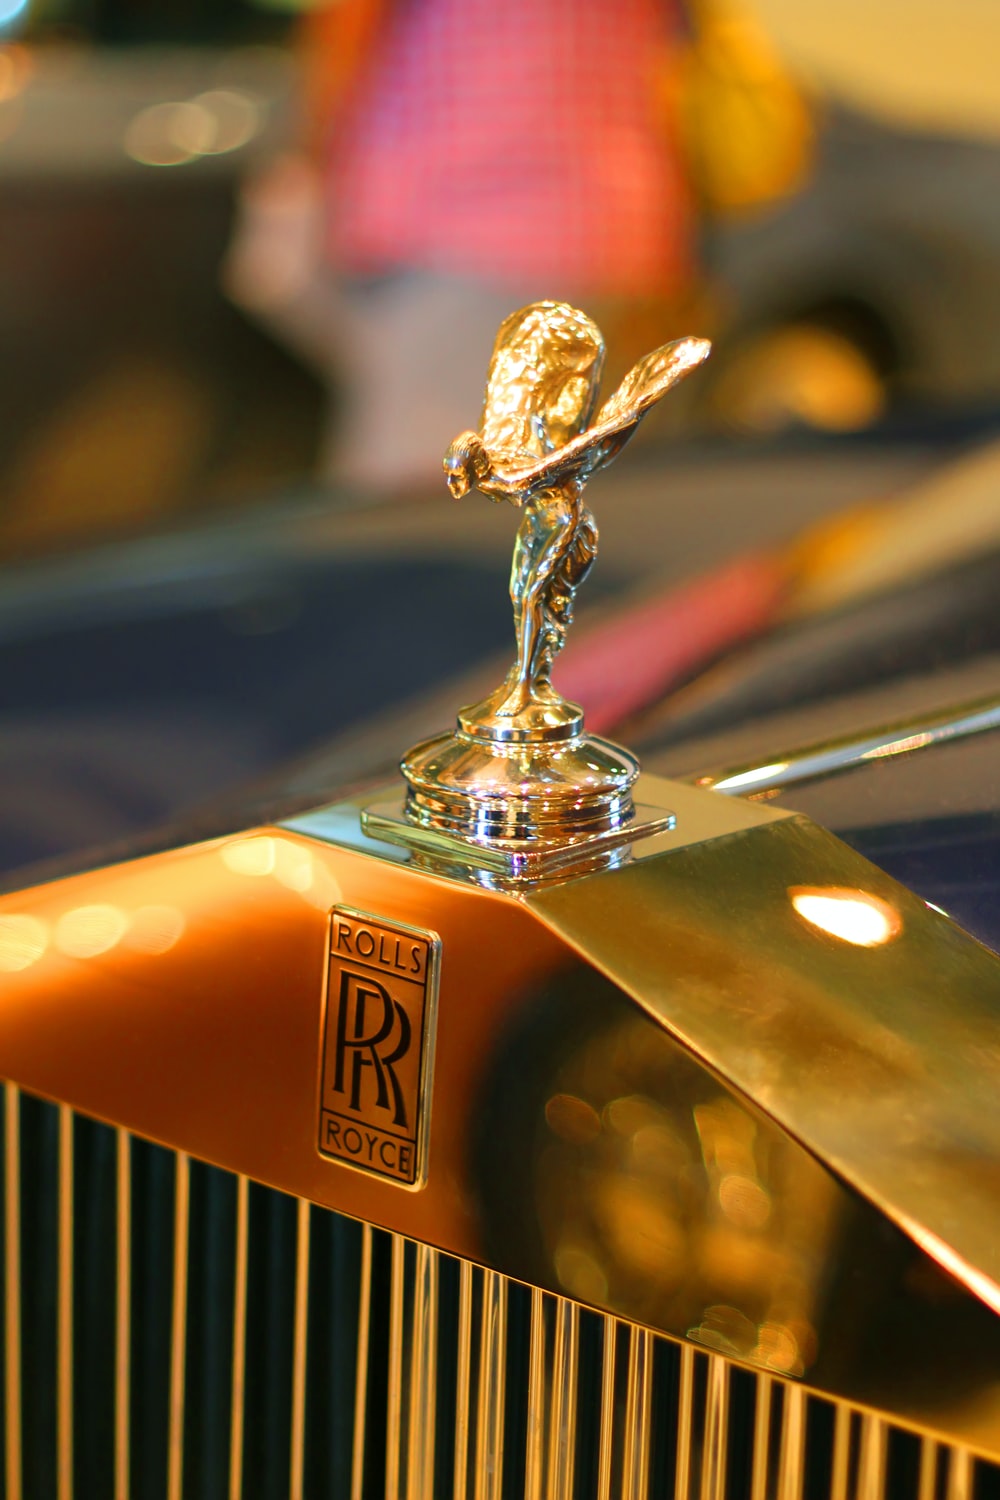 Rolls Royce Picture. Download Free Image